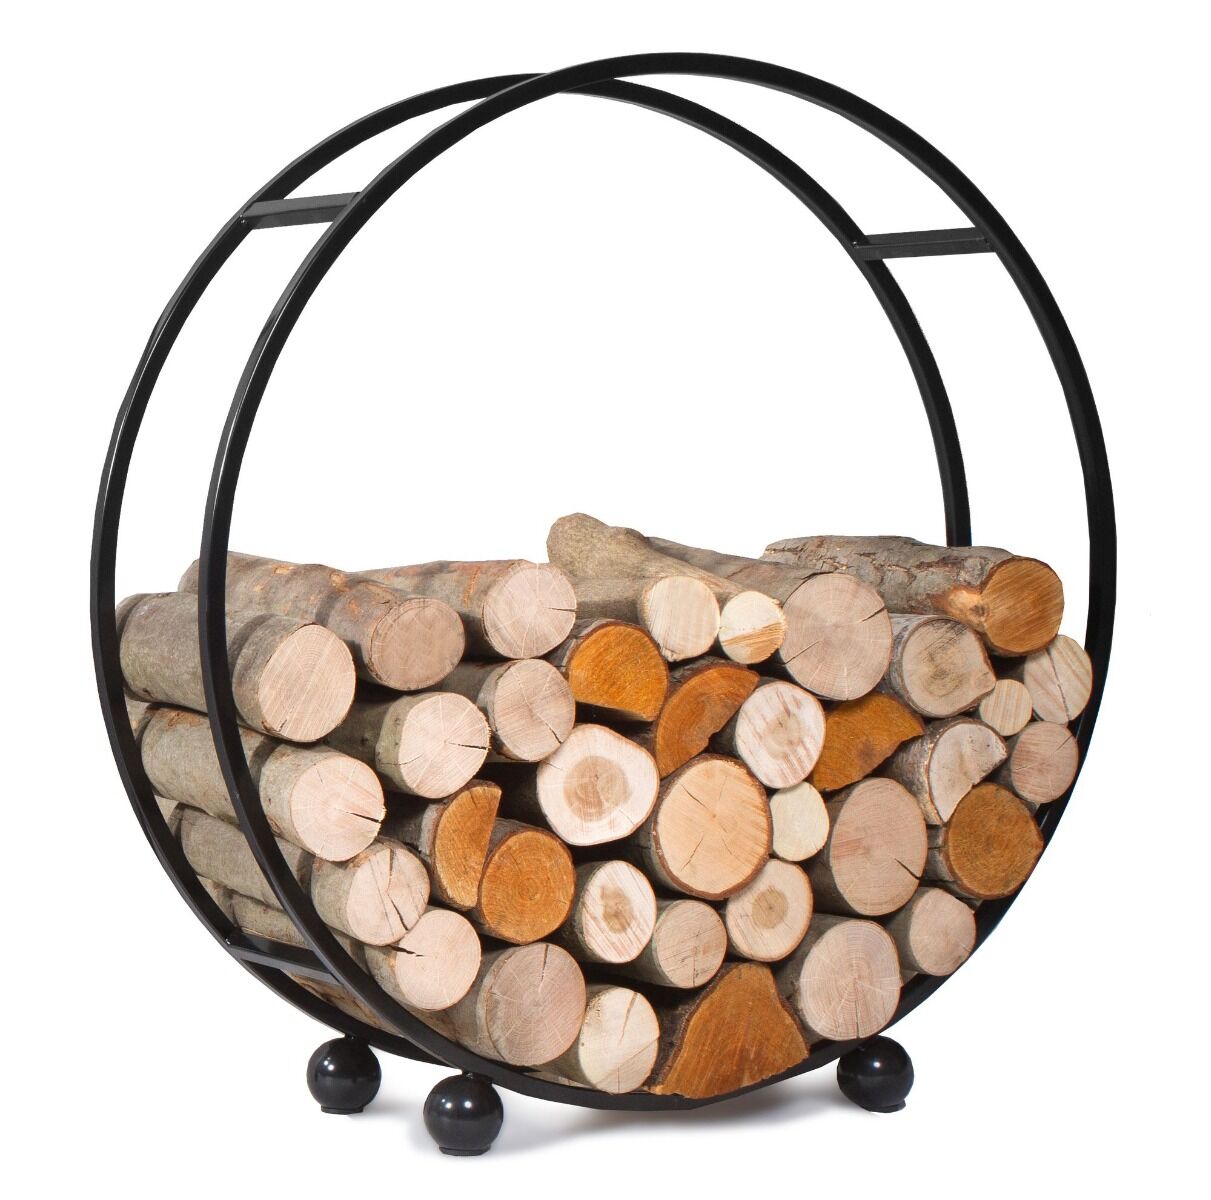 CookKing Holzlager Daisy 100 cm